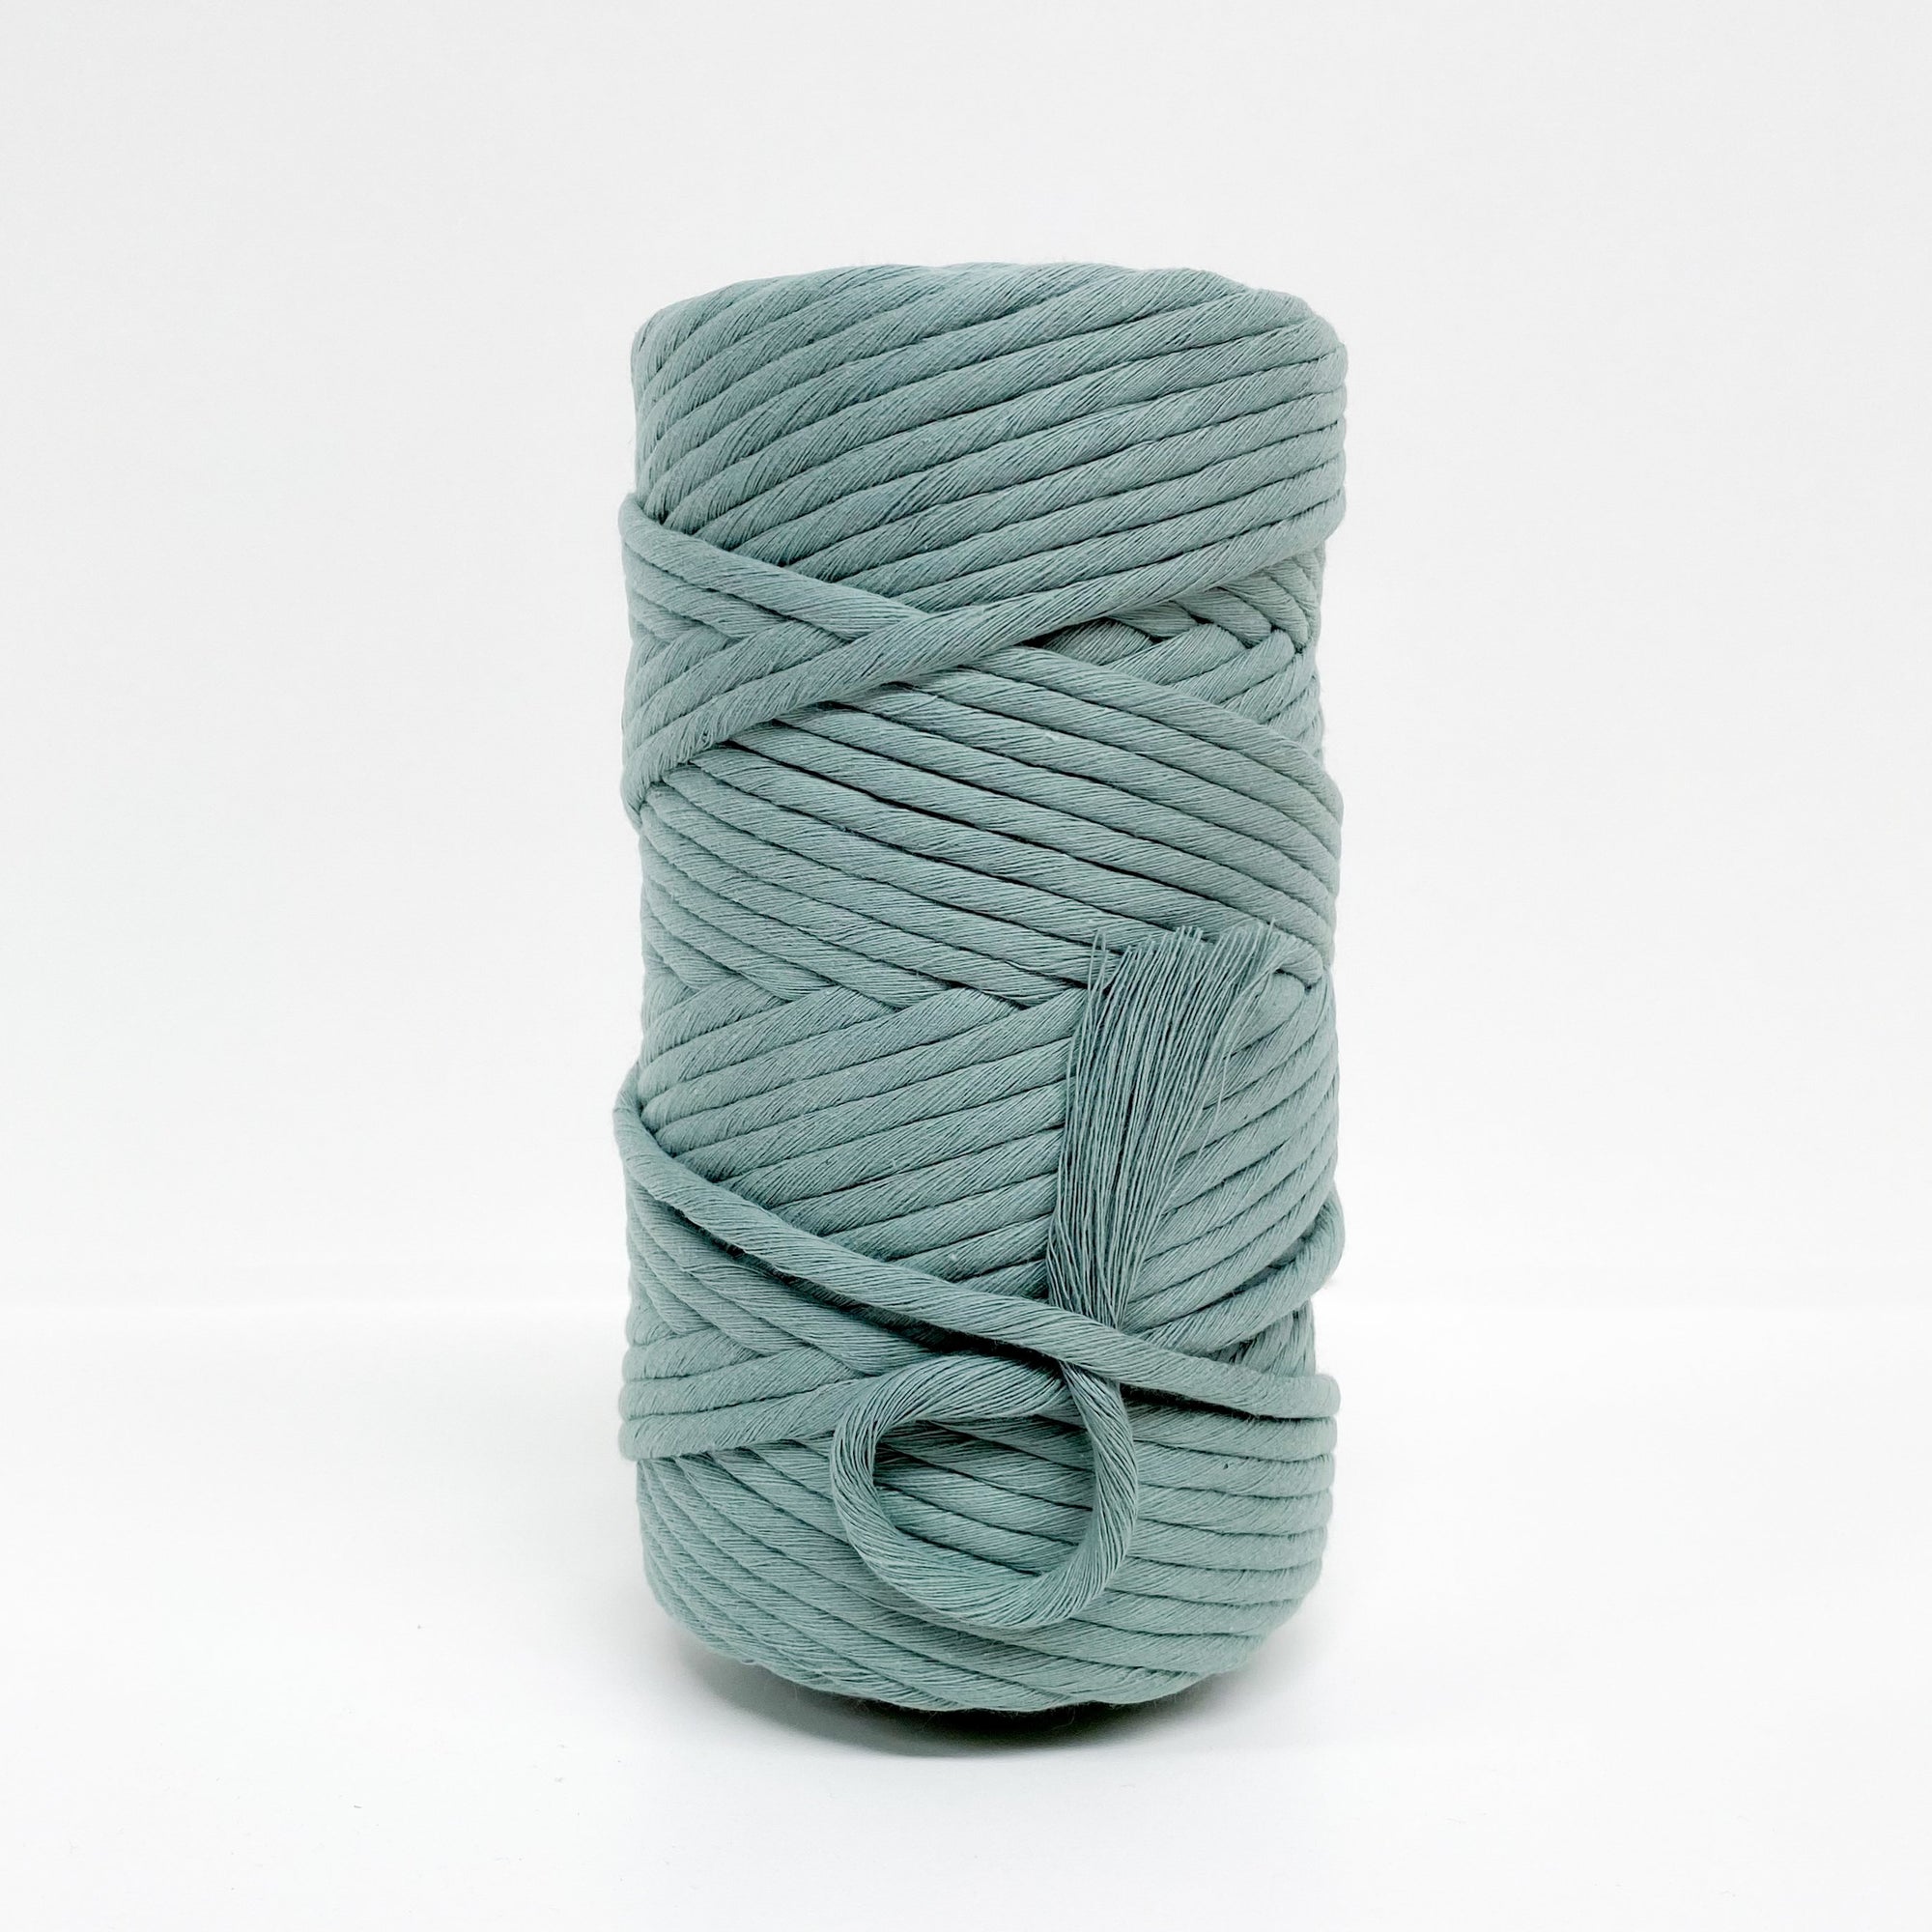 Mary Maker Studio Luxe Colour Cotton 8mm 1KG 8mm Recycled Luxe Macrame String // Eucalyptus macrame cotton macrame rope macrame workshop macrame patterns macrame